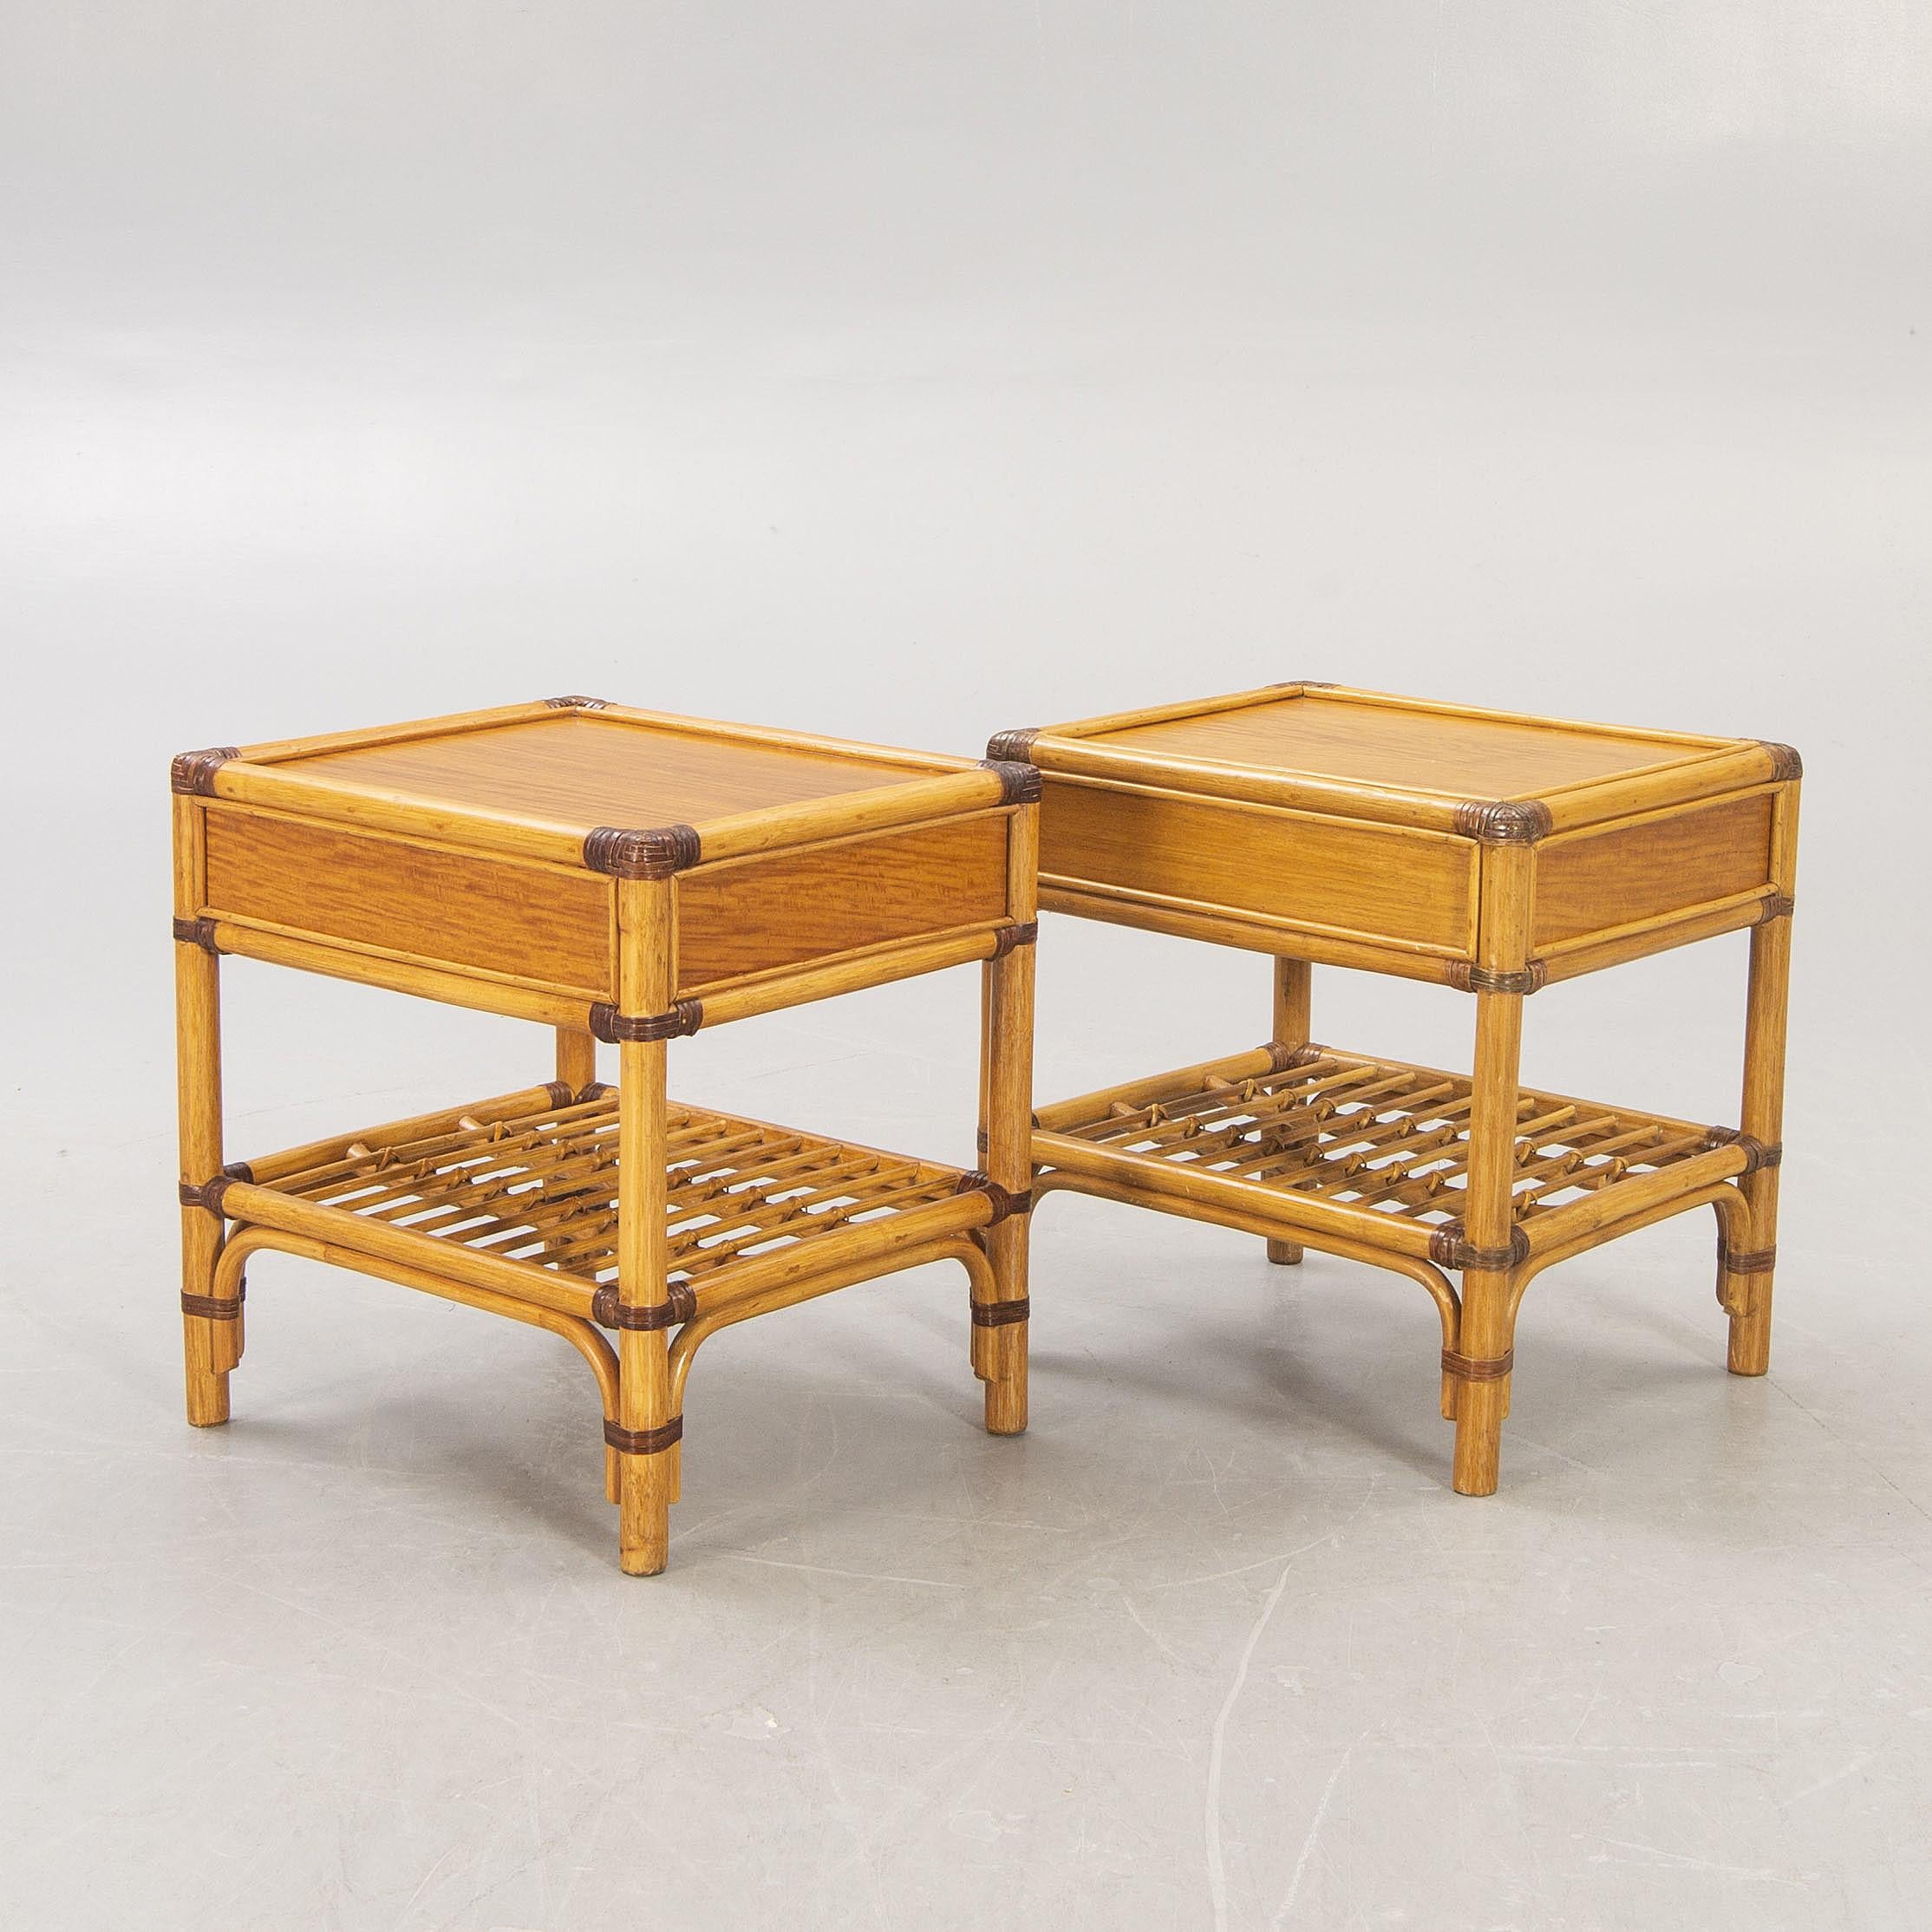 A pair of bamboo and wood nightstand anonymous for DUX Sweden, 1960
Good condition
more photo on demand.